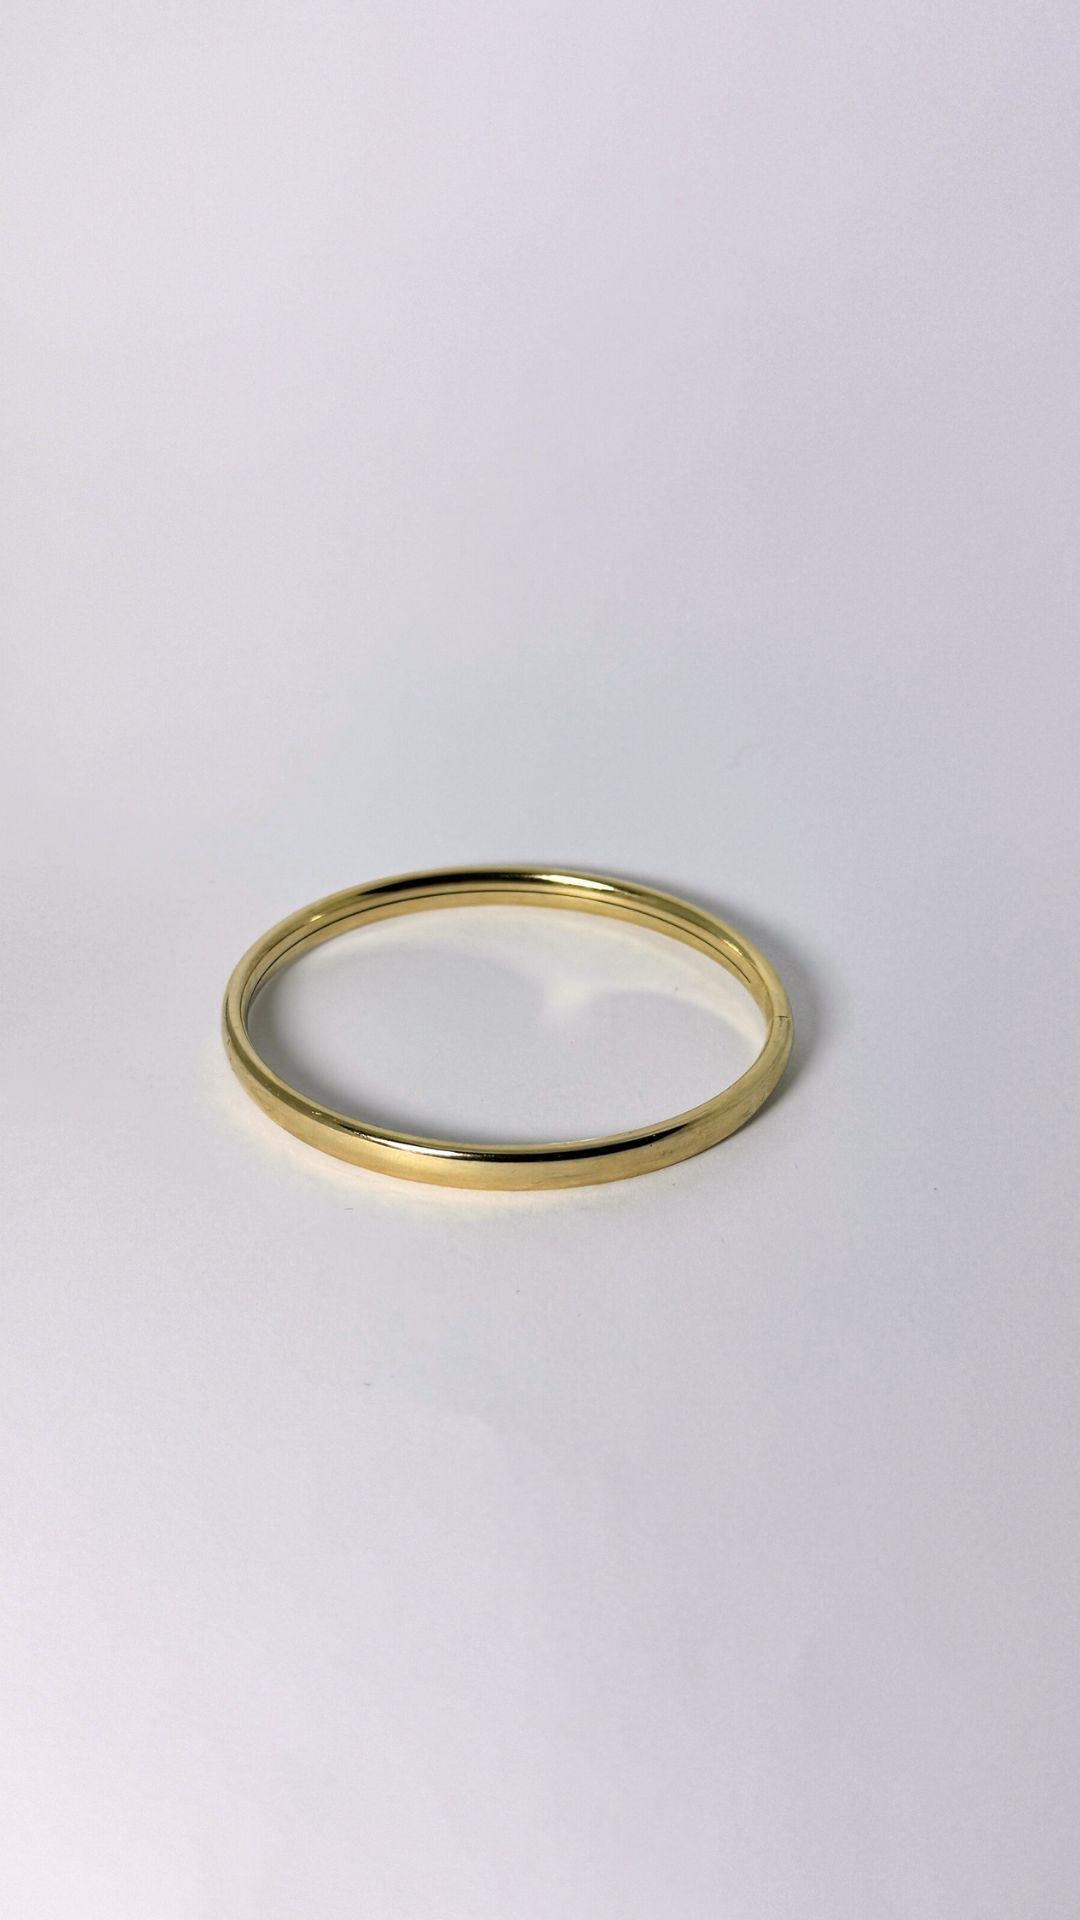 Really beautiful timeless and classic bracelet of 14 carat yellow gold and features a bucket clasp.  The inner measure of this oval bracelet is about 64 mm which is a regular fit for bangle bracelets. The height of the bracelet is 6 mm. Weighs about